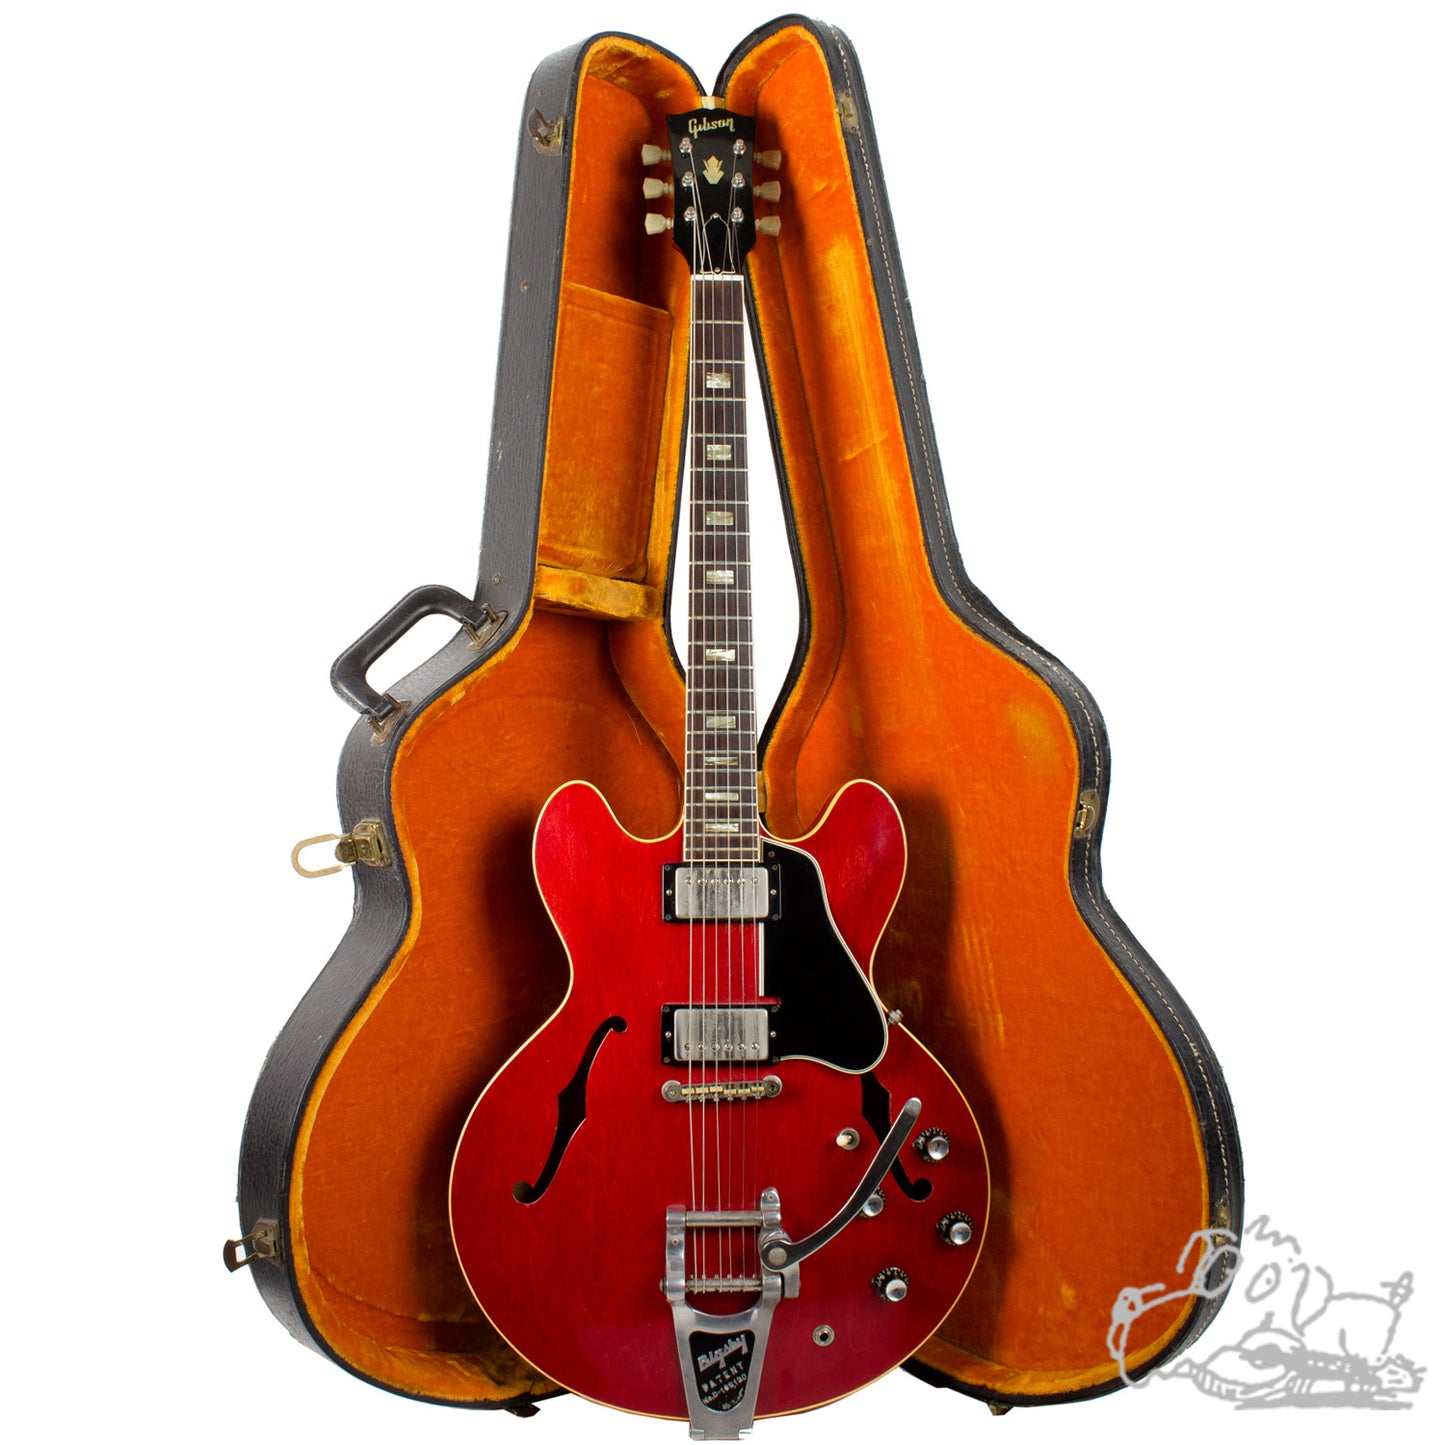 1965 Gibson ES-335 with factory bigsby